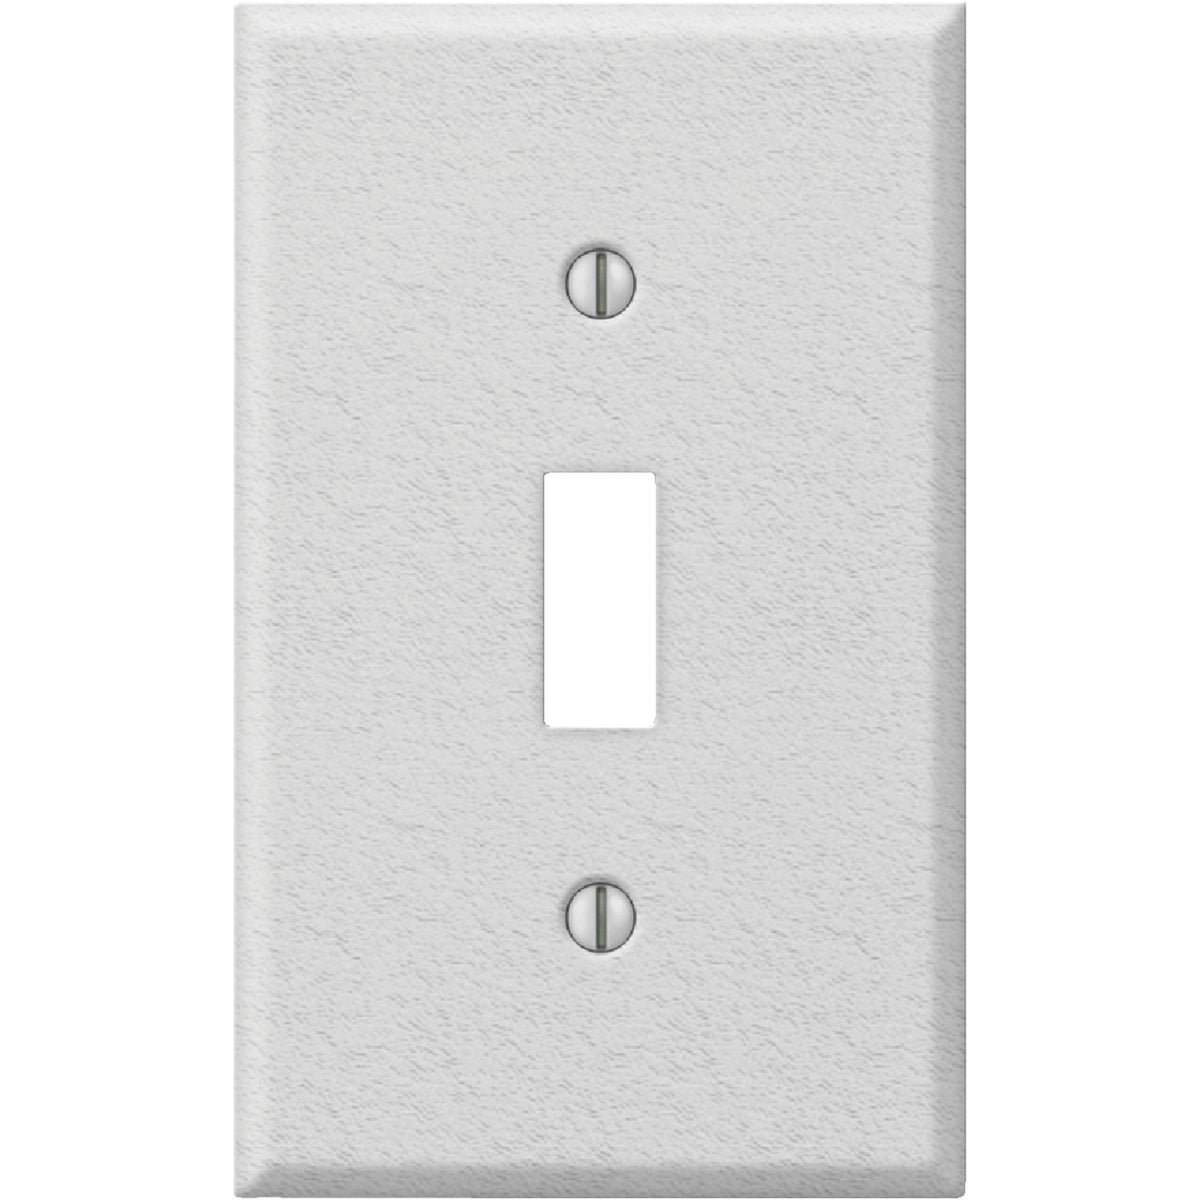 Amerelle PRO 1-Gang Stamped Steel Toggle Switch Wall Plate, White Wrinkle